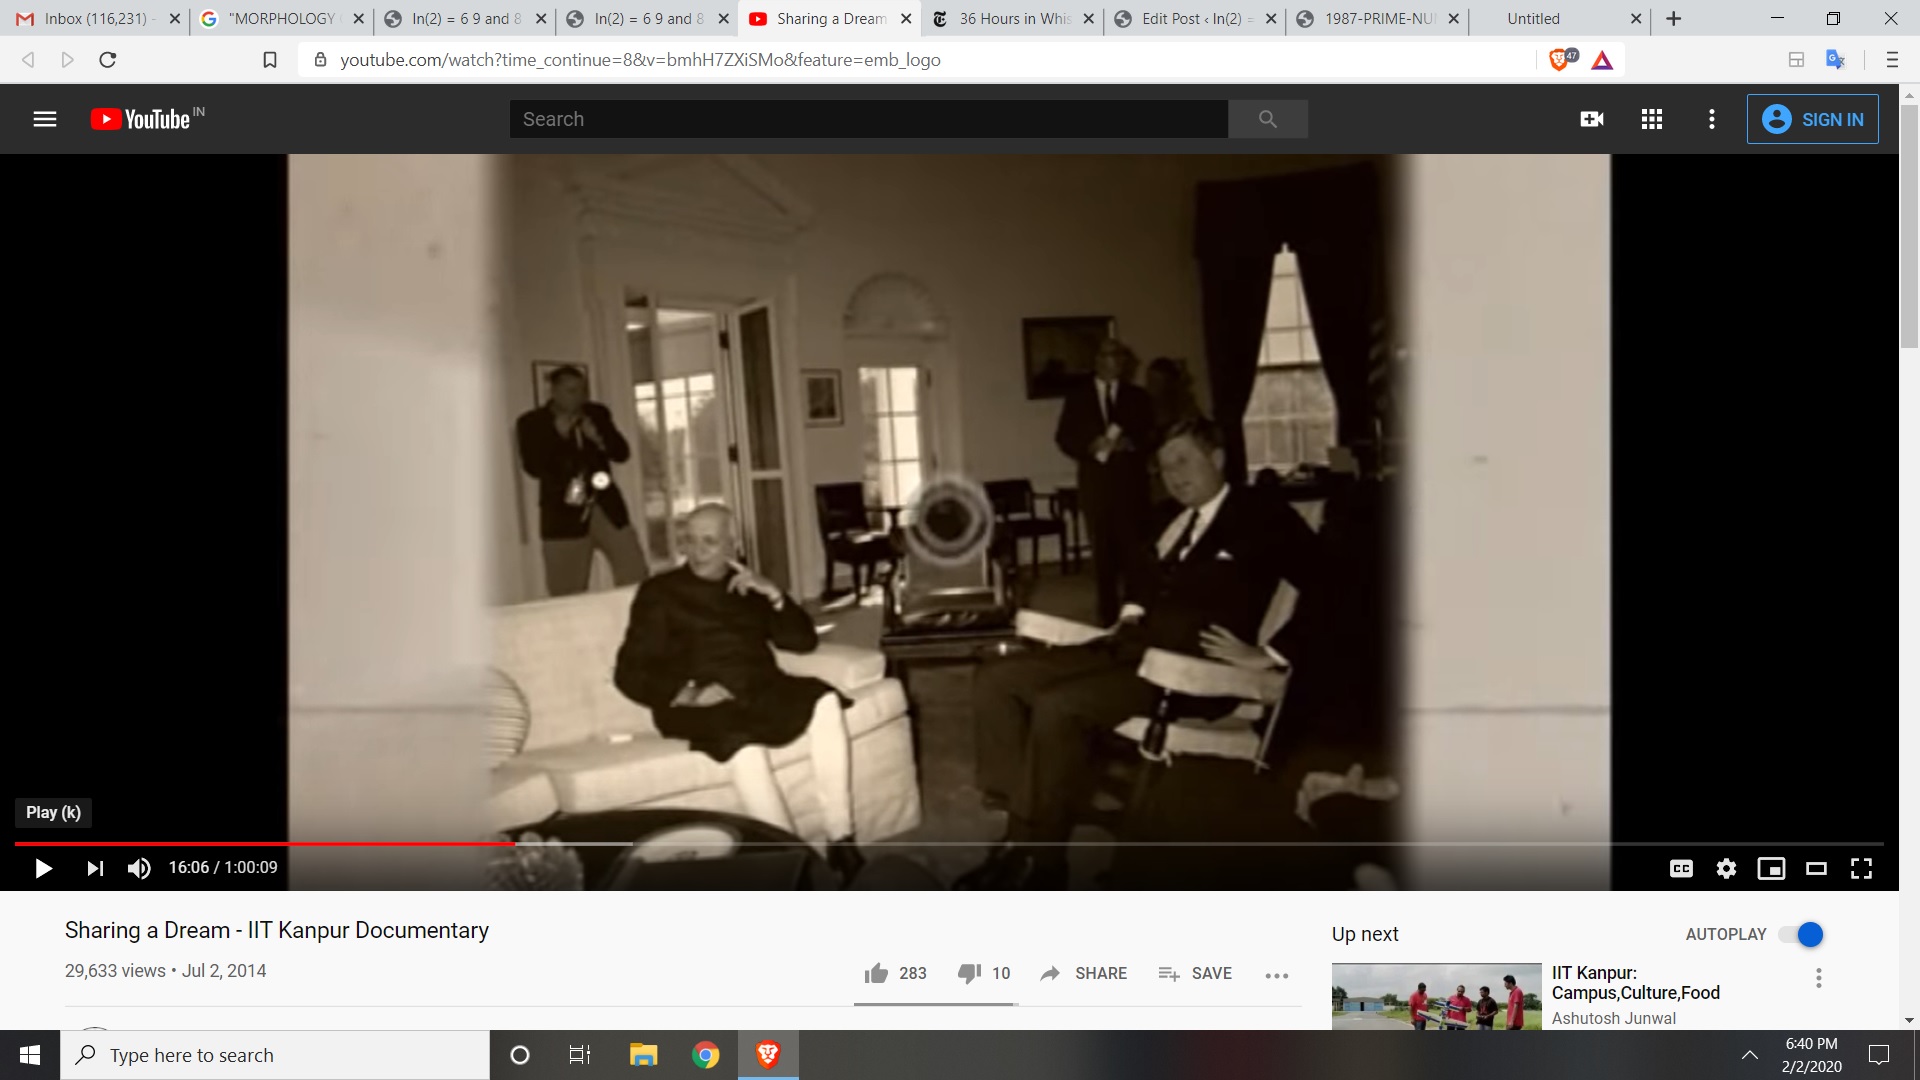 SO THATS 16 06 AND 106 - KENNEDY NEHRU - MITEM SONGA ND KENNEDY SAREE BARAC K - AND MISTER BIDEN - BUBBA - 106 IS ME AN U AND 87017 NUMBER SEEN OLGA AND OBAMA